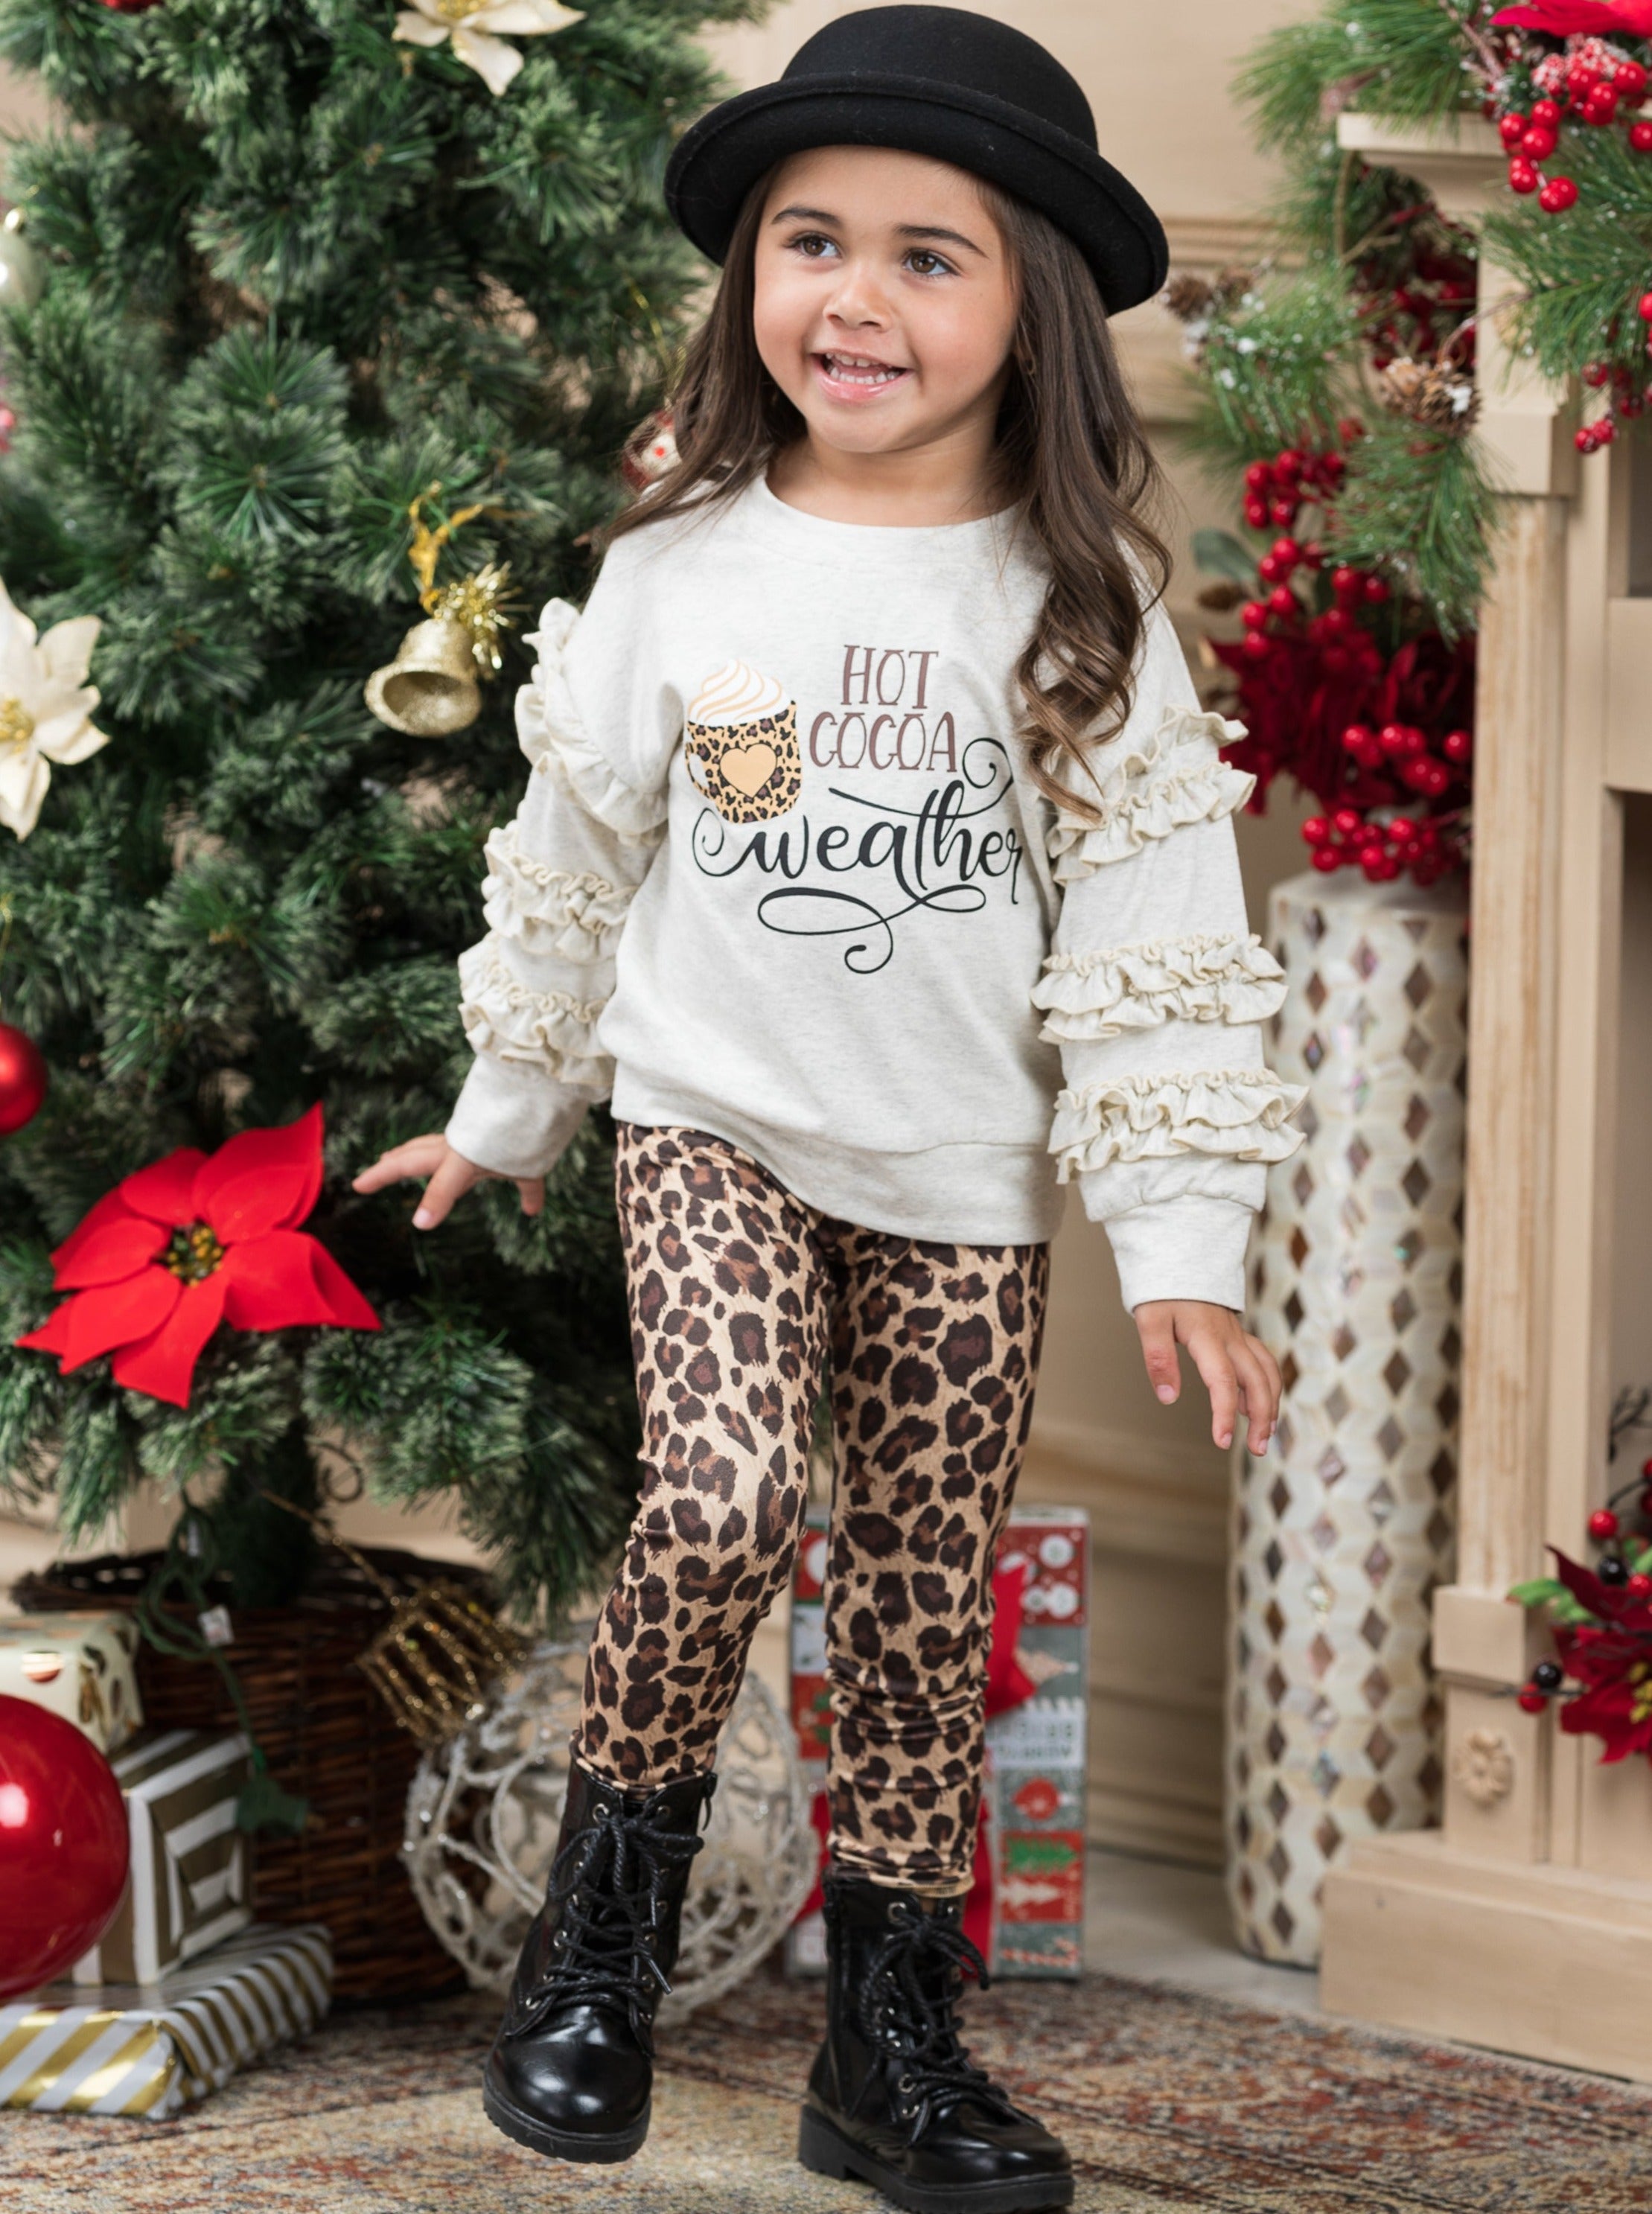 | Winter Set Weather – Hot Leopard Cocoa Girls Girls Pullover & Casual Belle Mia Leggings